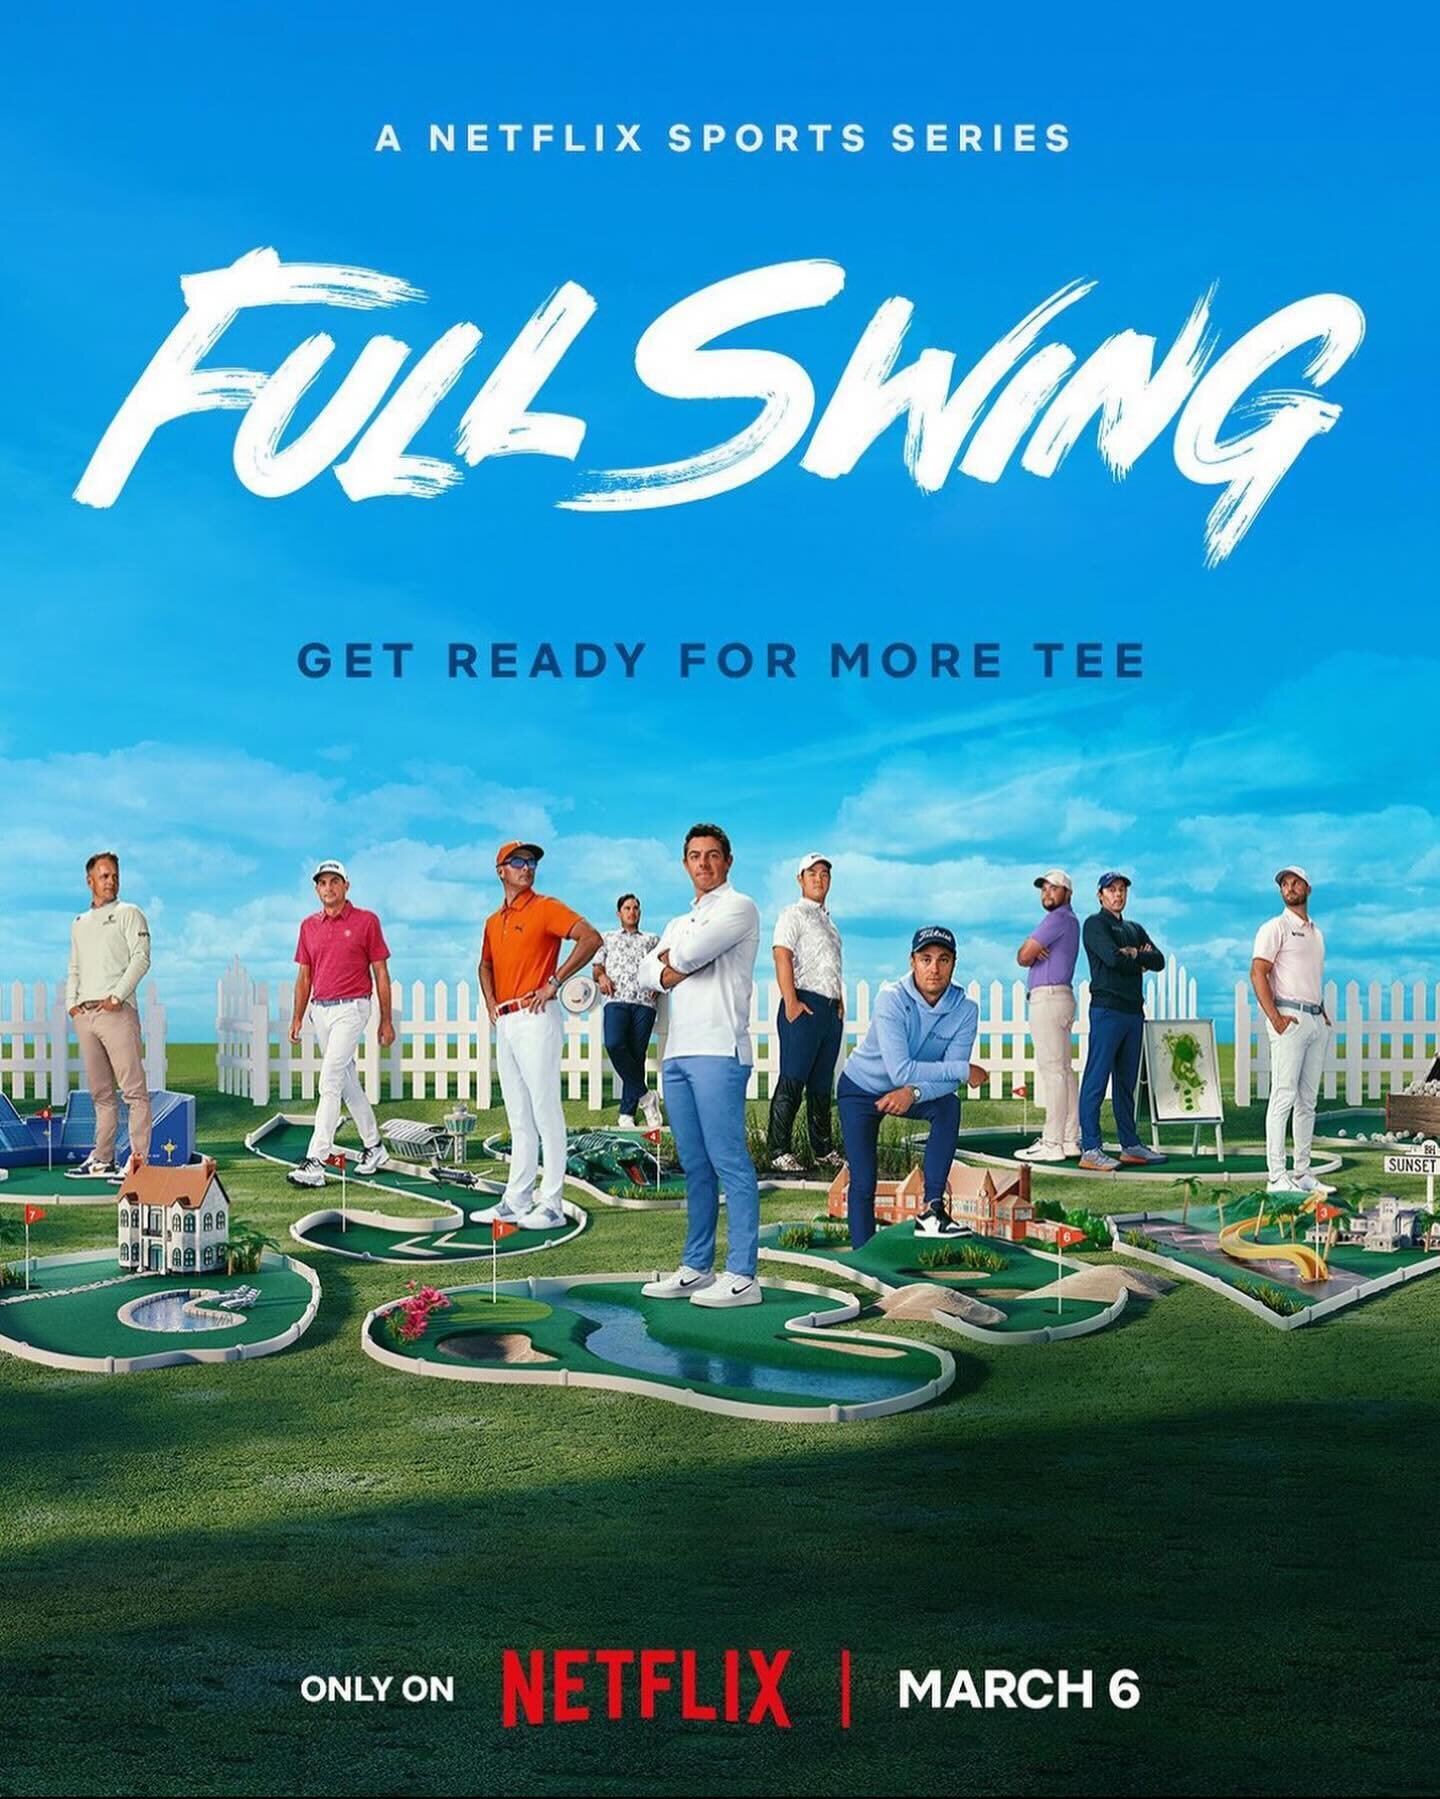 👀 season 2 is coming out - March 6th. Who&rsquo;s watching? 

via @netflix 

#fullswing #season2